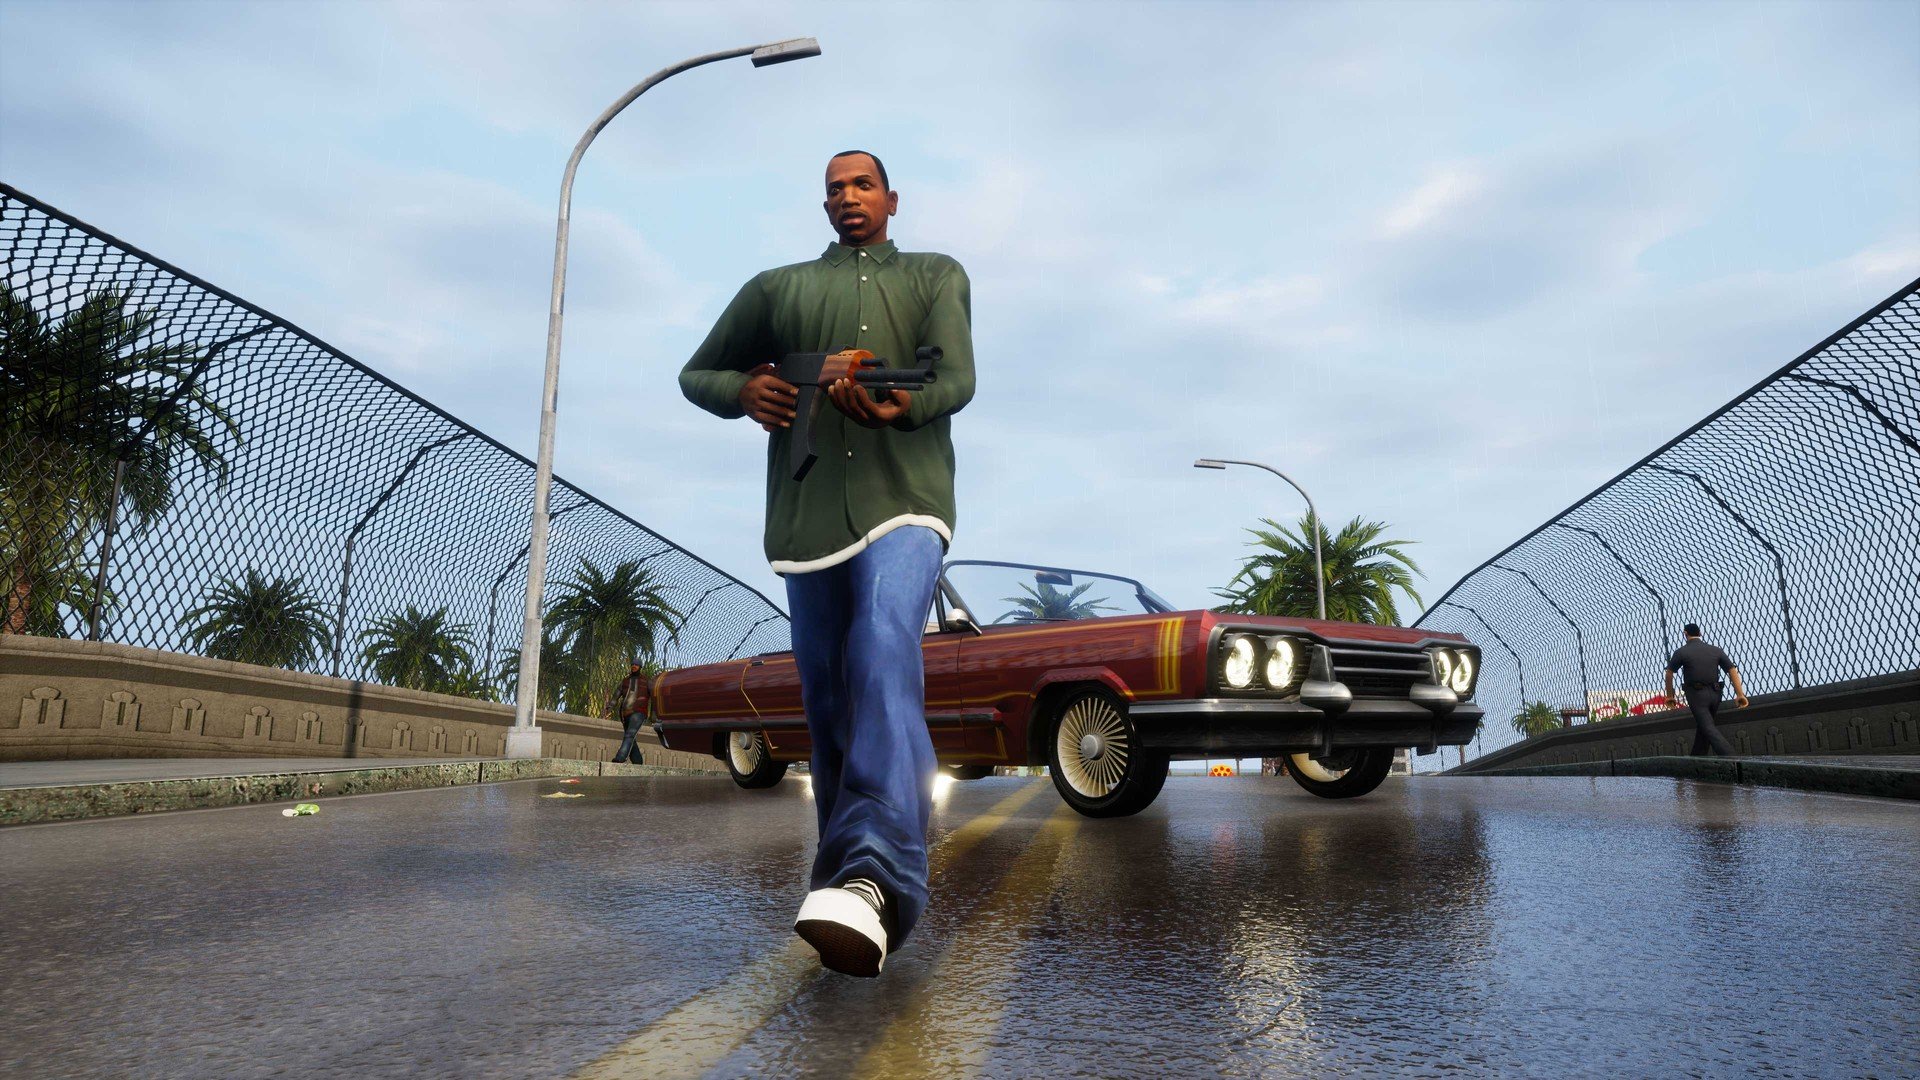 GTA Trilogy receives official patch from Rockstar with fixes for several bugs